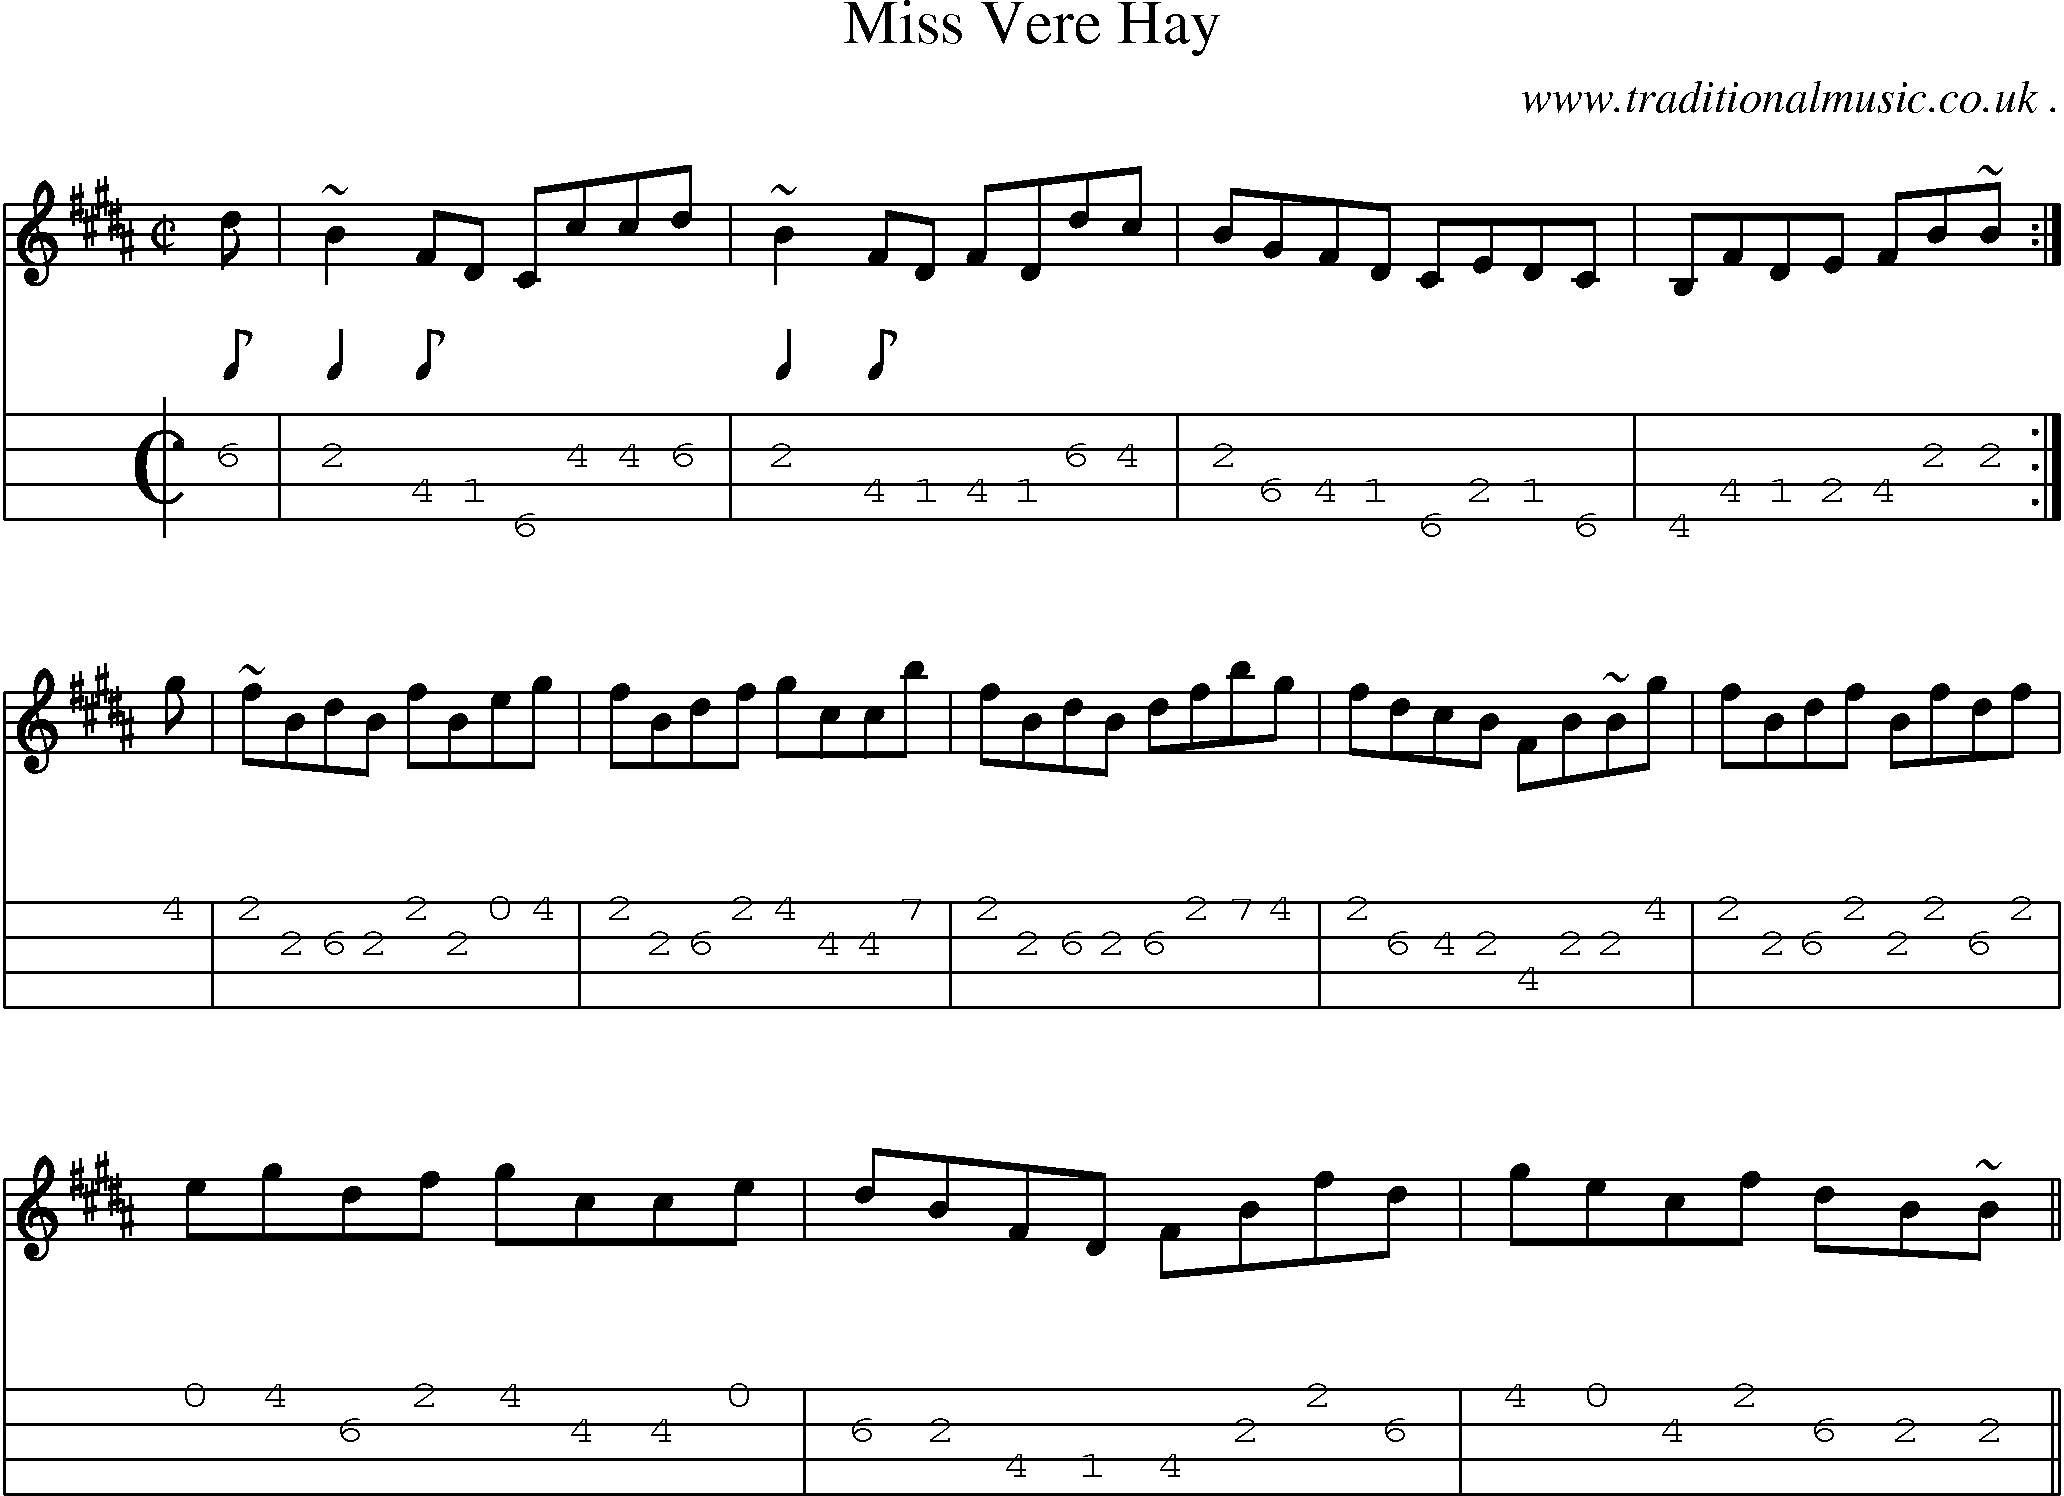 Sheet-music  score, Chords and Mandolin Tabs for Miss Vere Hay